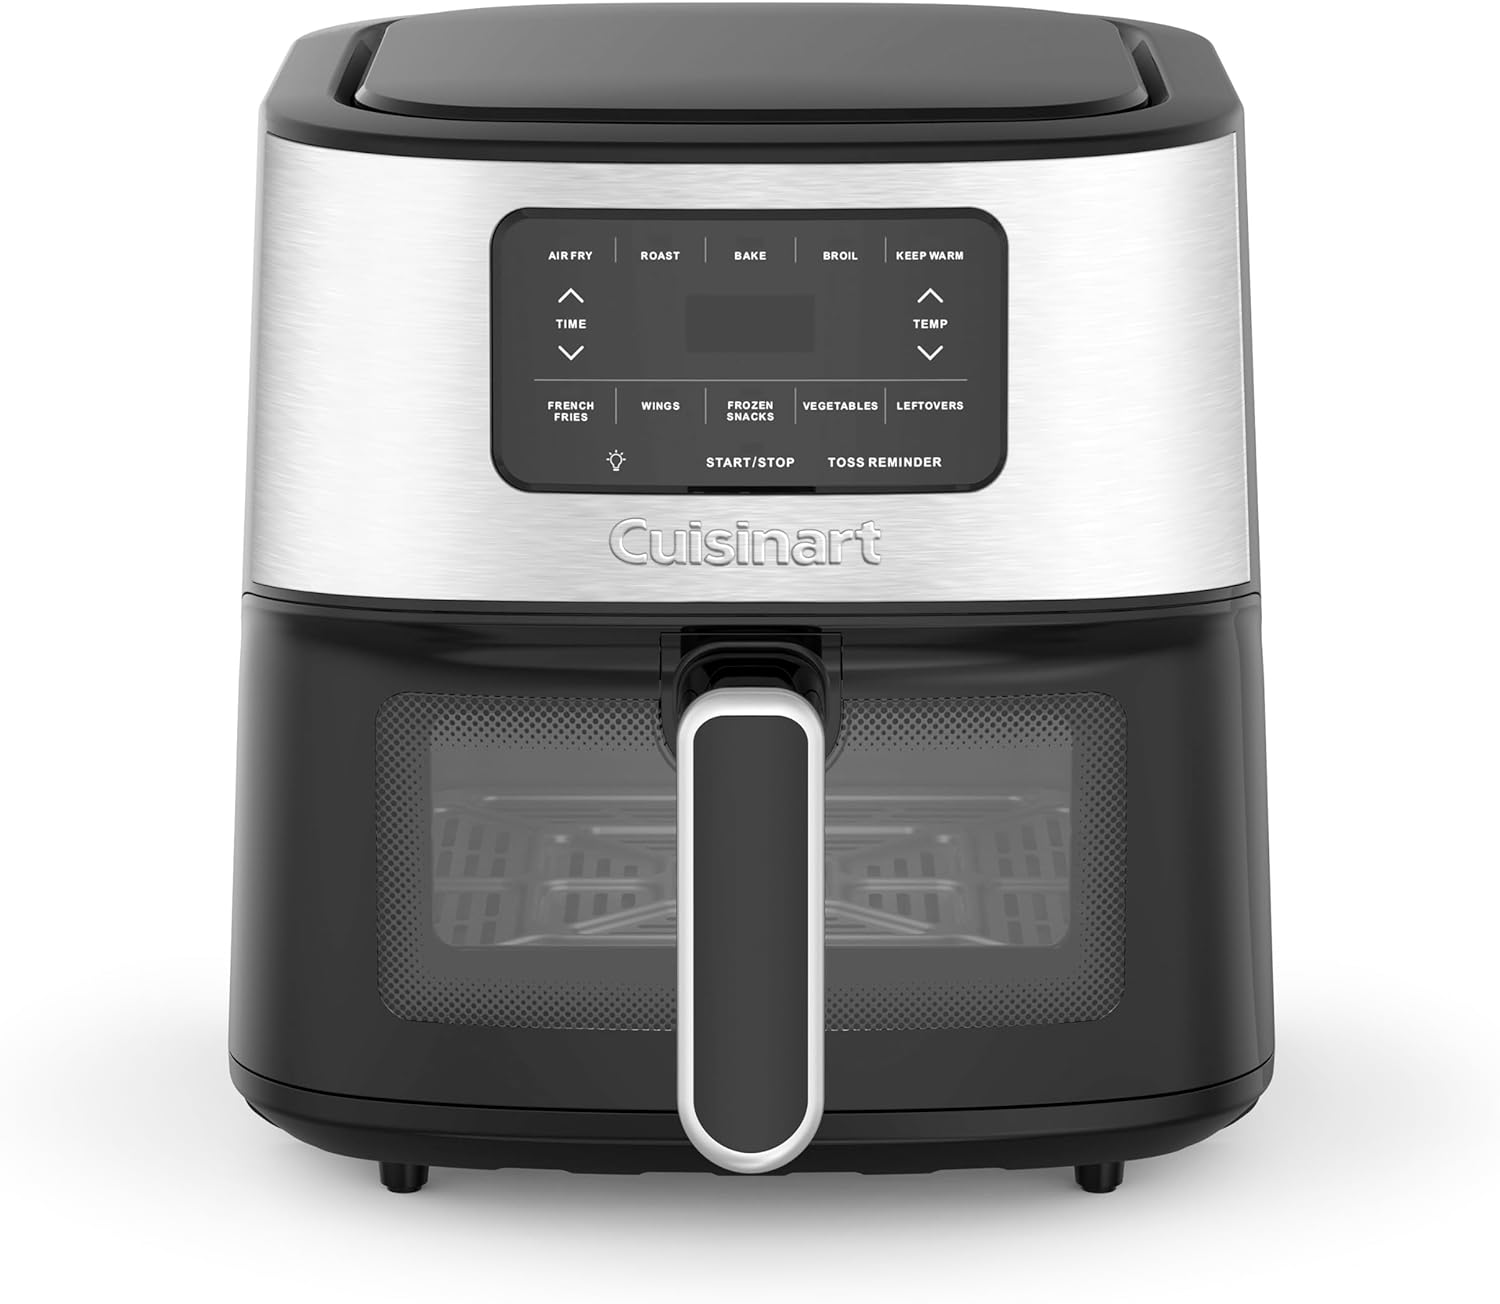 Cuisinart Air Fryer Oven – 6-Qt Basket Stainless Steel Air Fryer – Dishwasher-Safe Air Fryer Toaster Oven Combo with 5 Presets – Roast, Bake, Broil and Air Fry Quick  Easy Meals